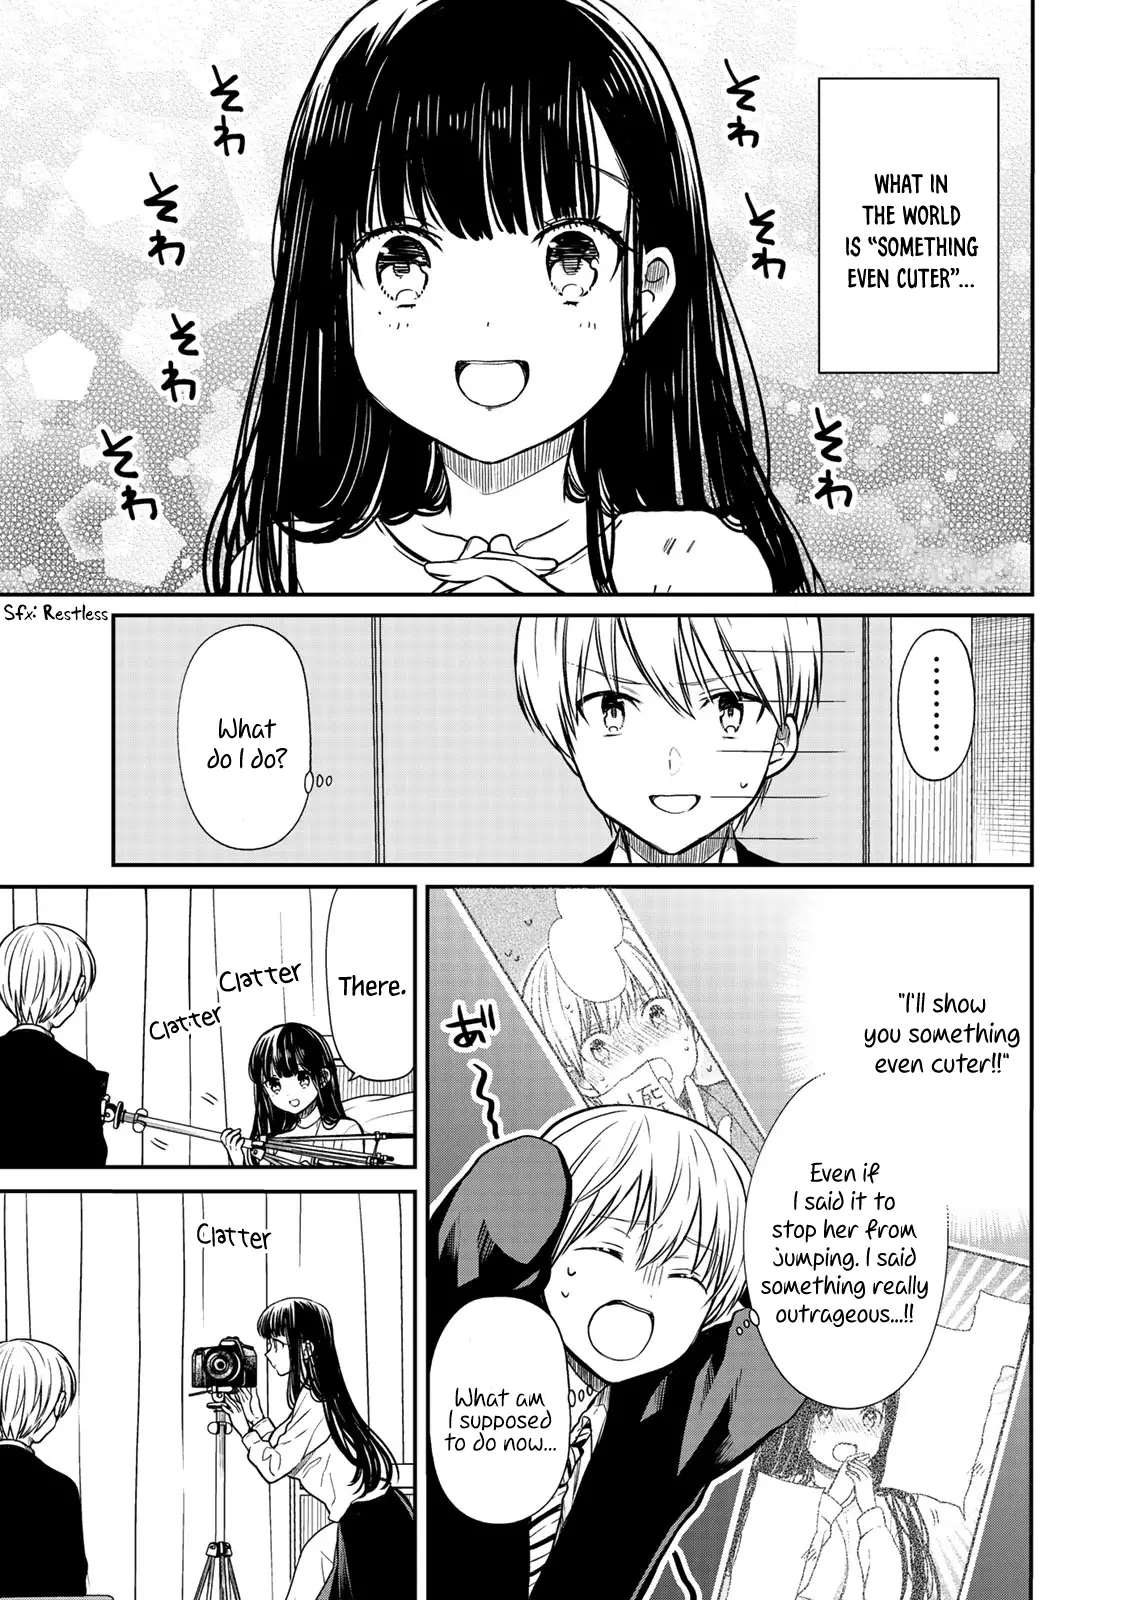 The Story Of An Onee-San Who Wants To Keep A High School Boy - 134.5 page 2